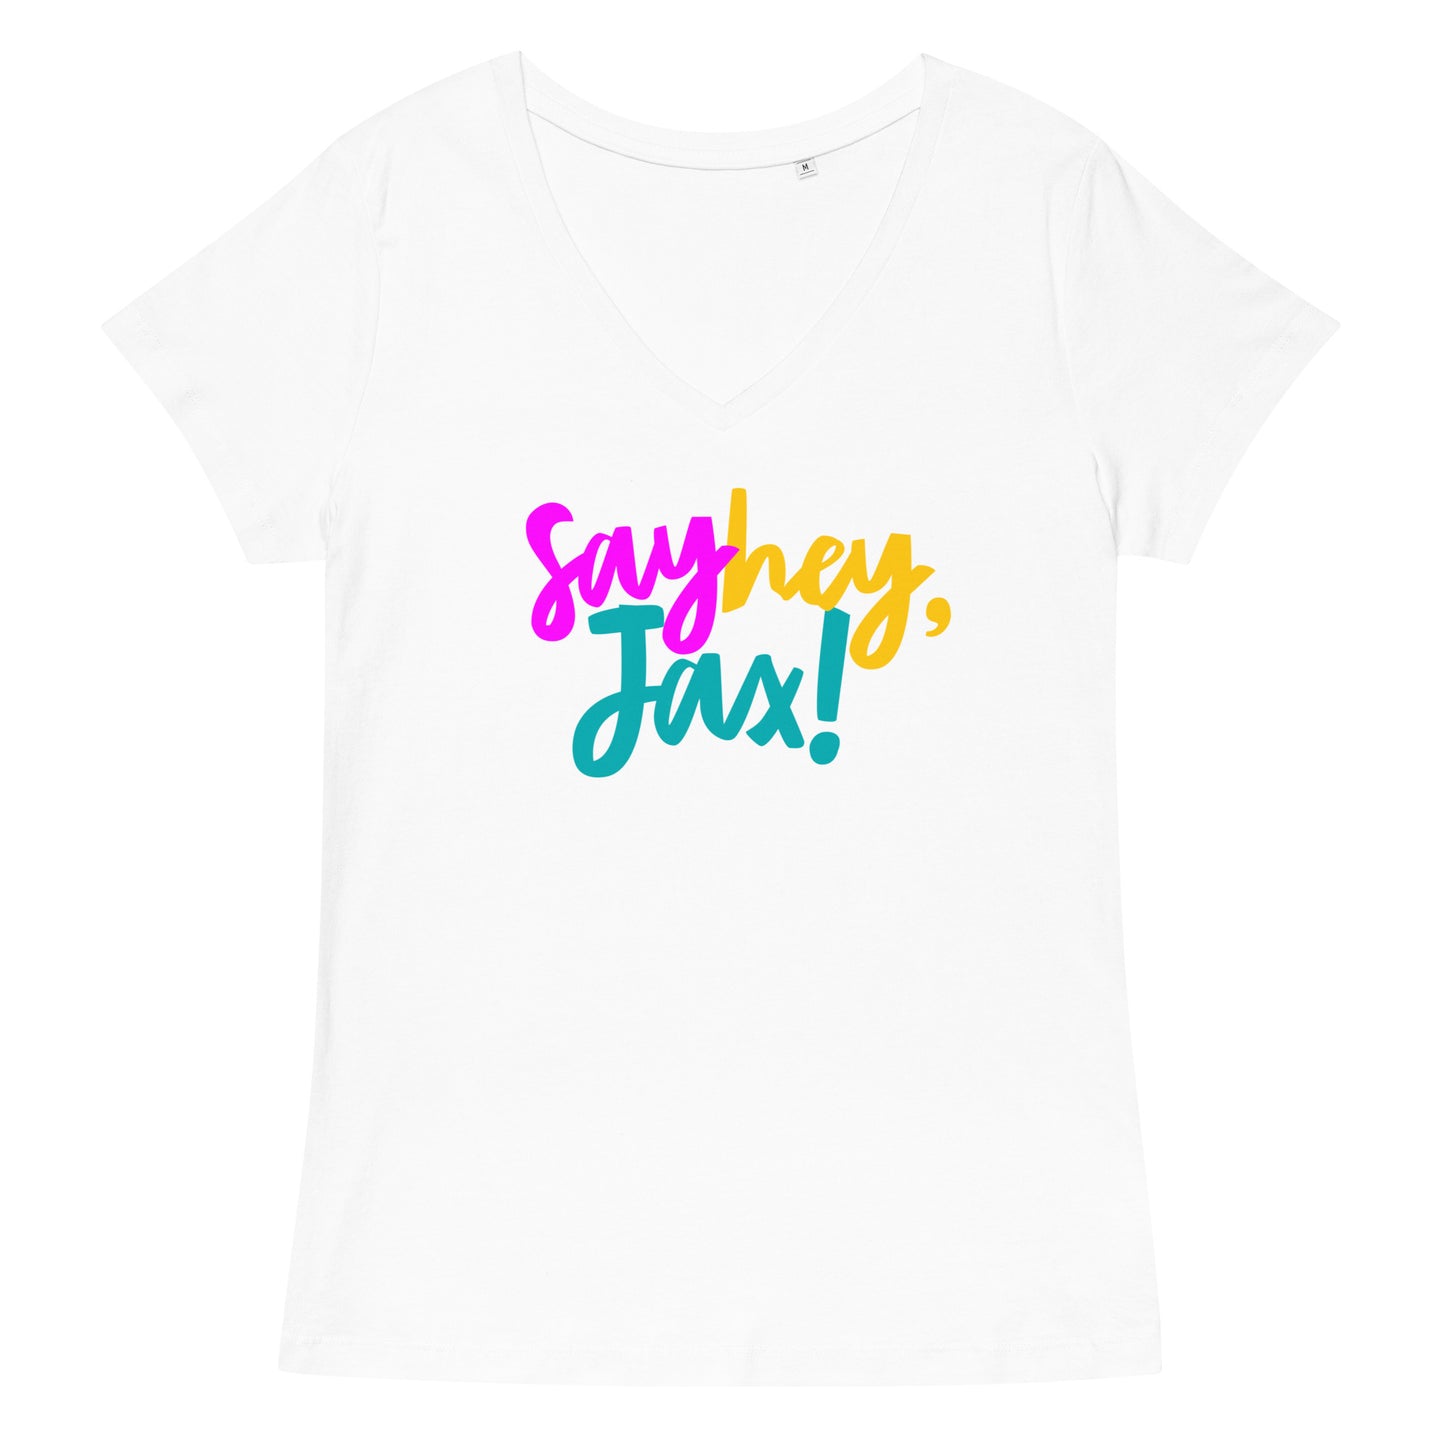 Say Hey Jax! Women’s fitted v-neck t-shirt